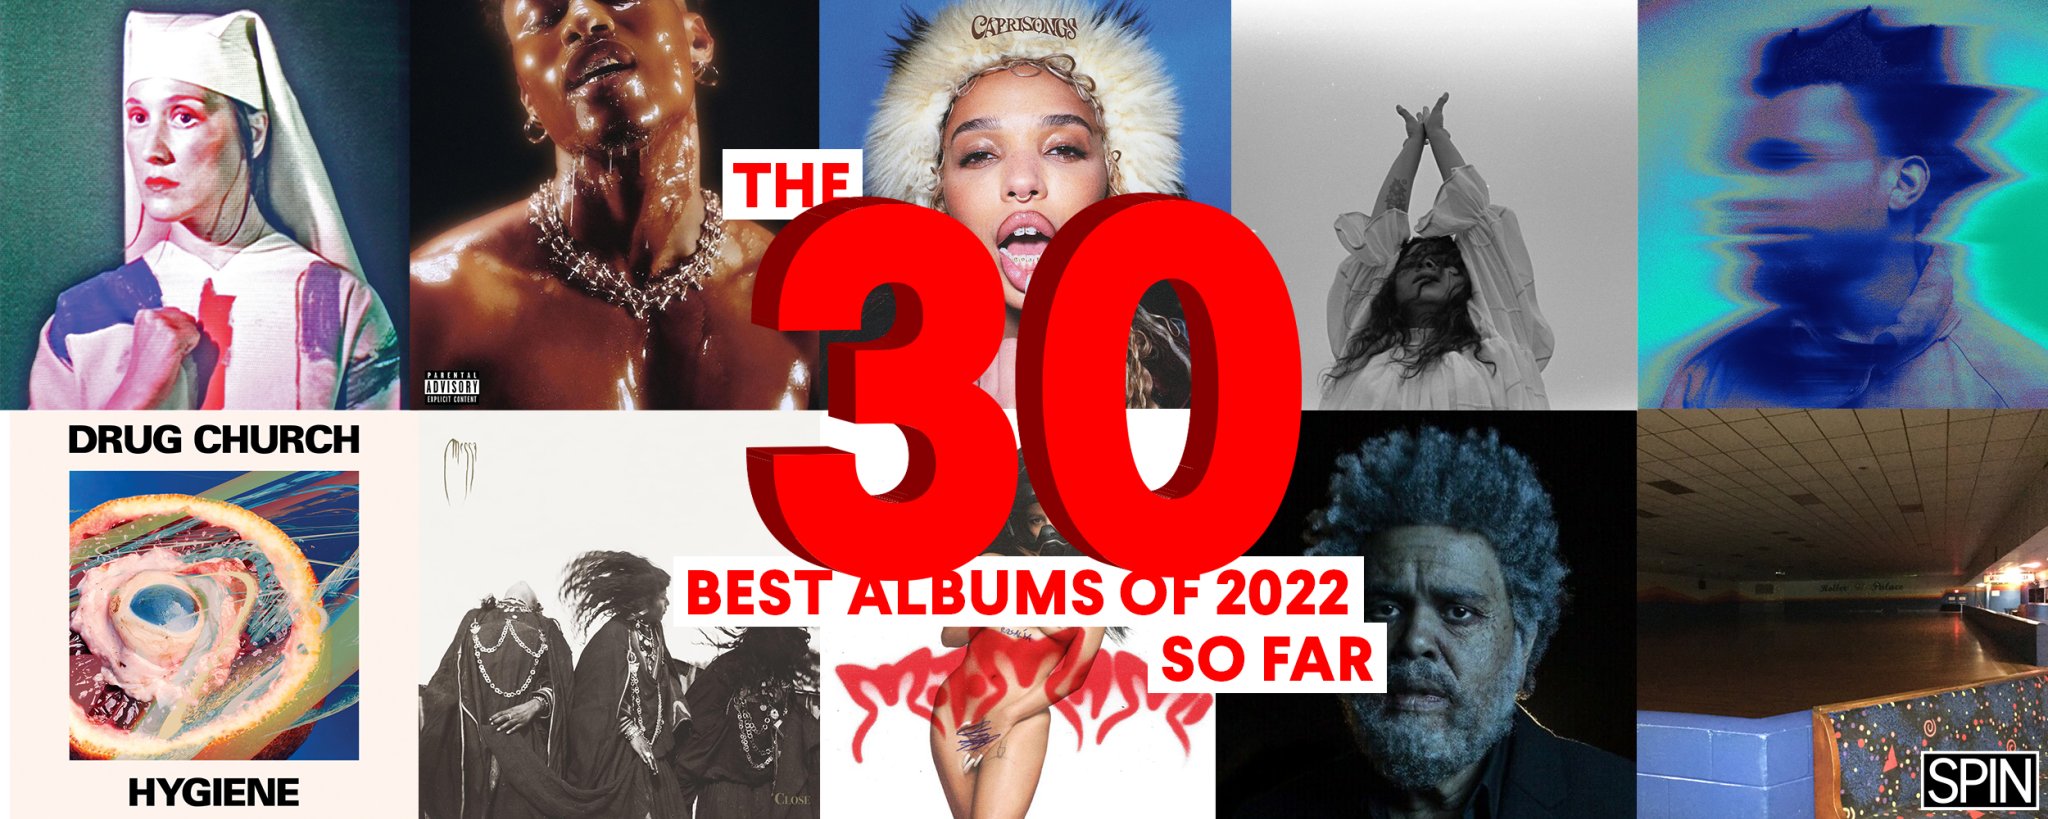 The 30 Best Albums of 2022 (So Far) - SPIN